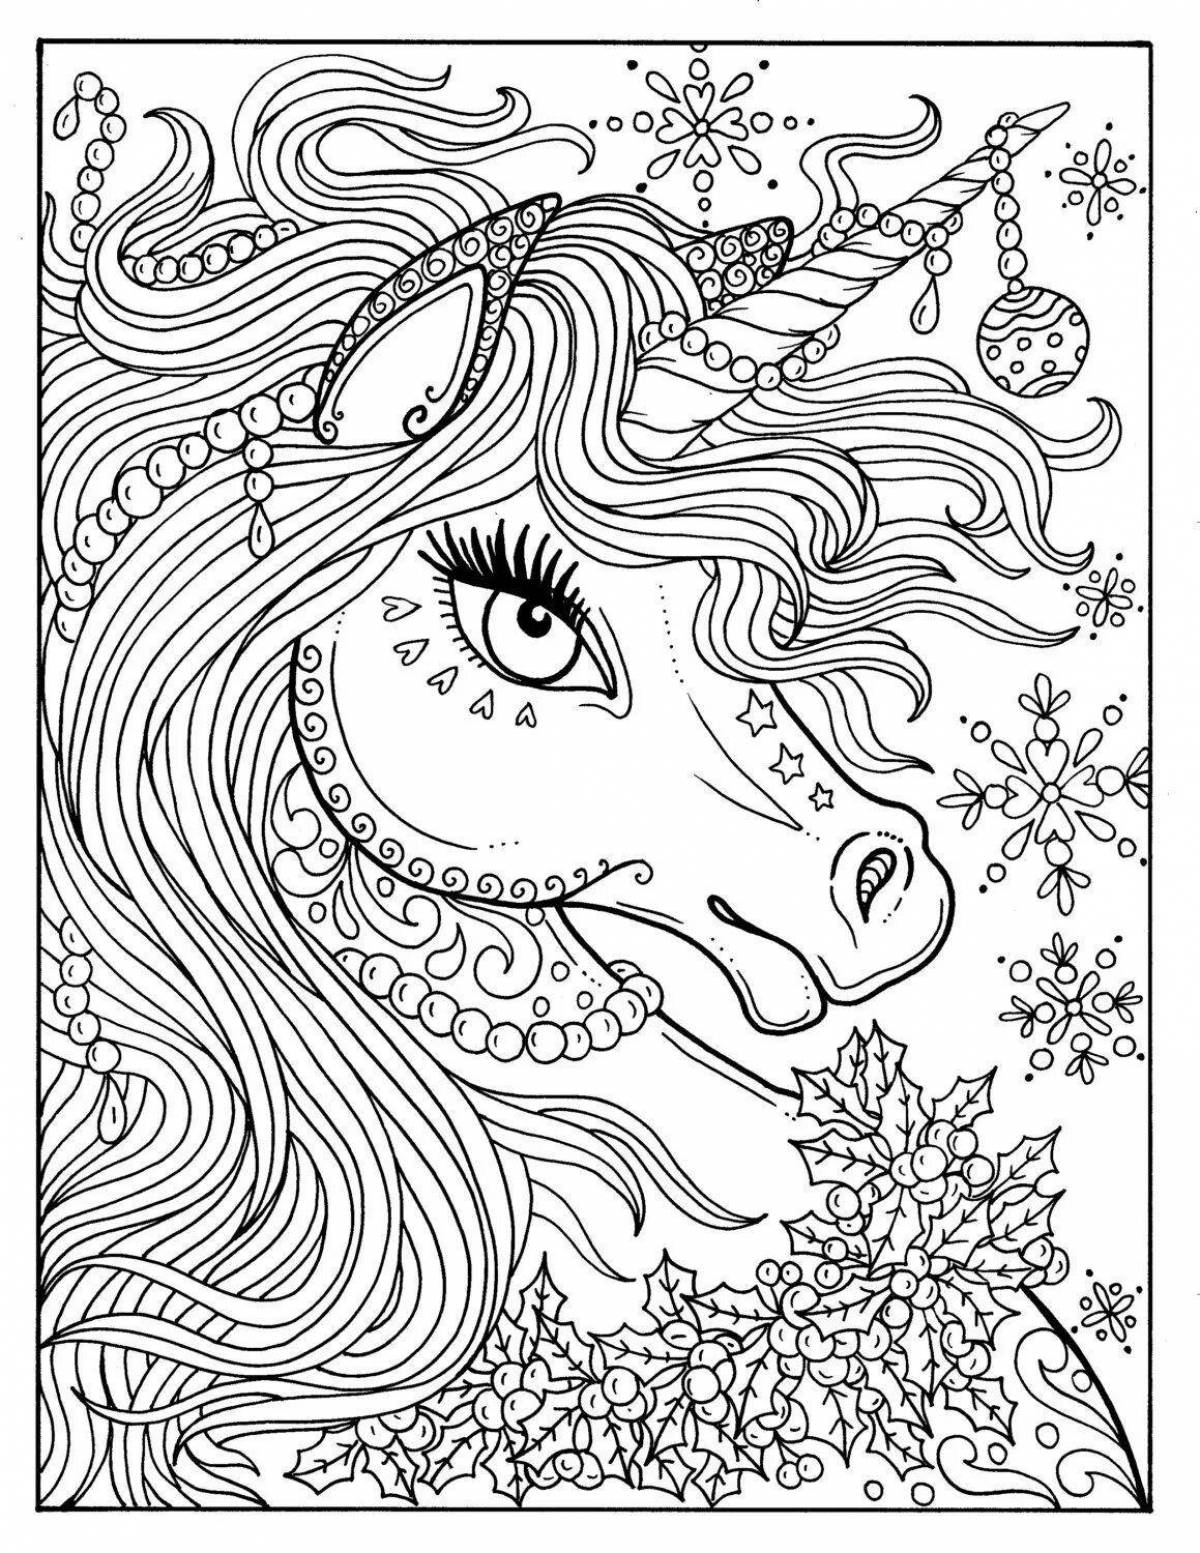 A wonderful coloring book for girls 9-10 years old